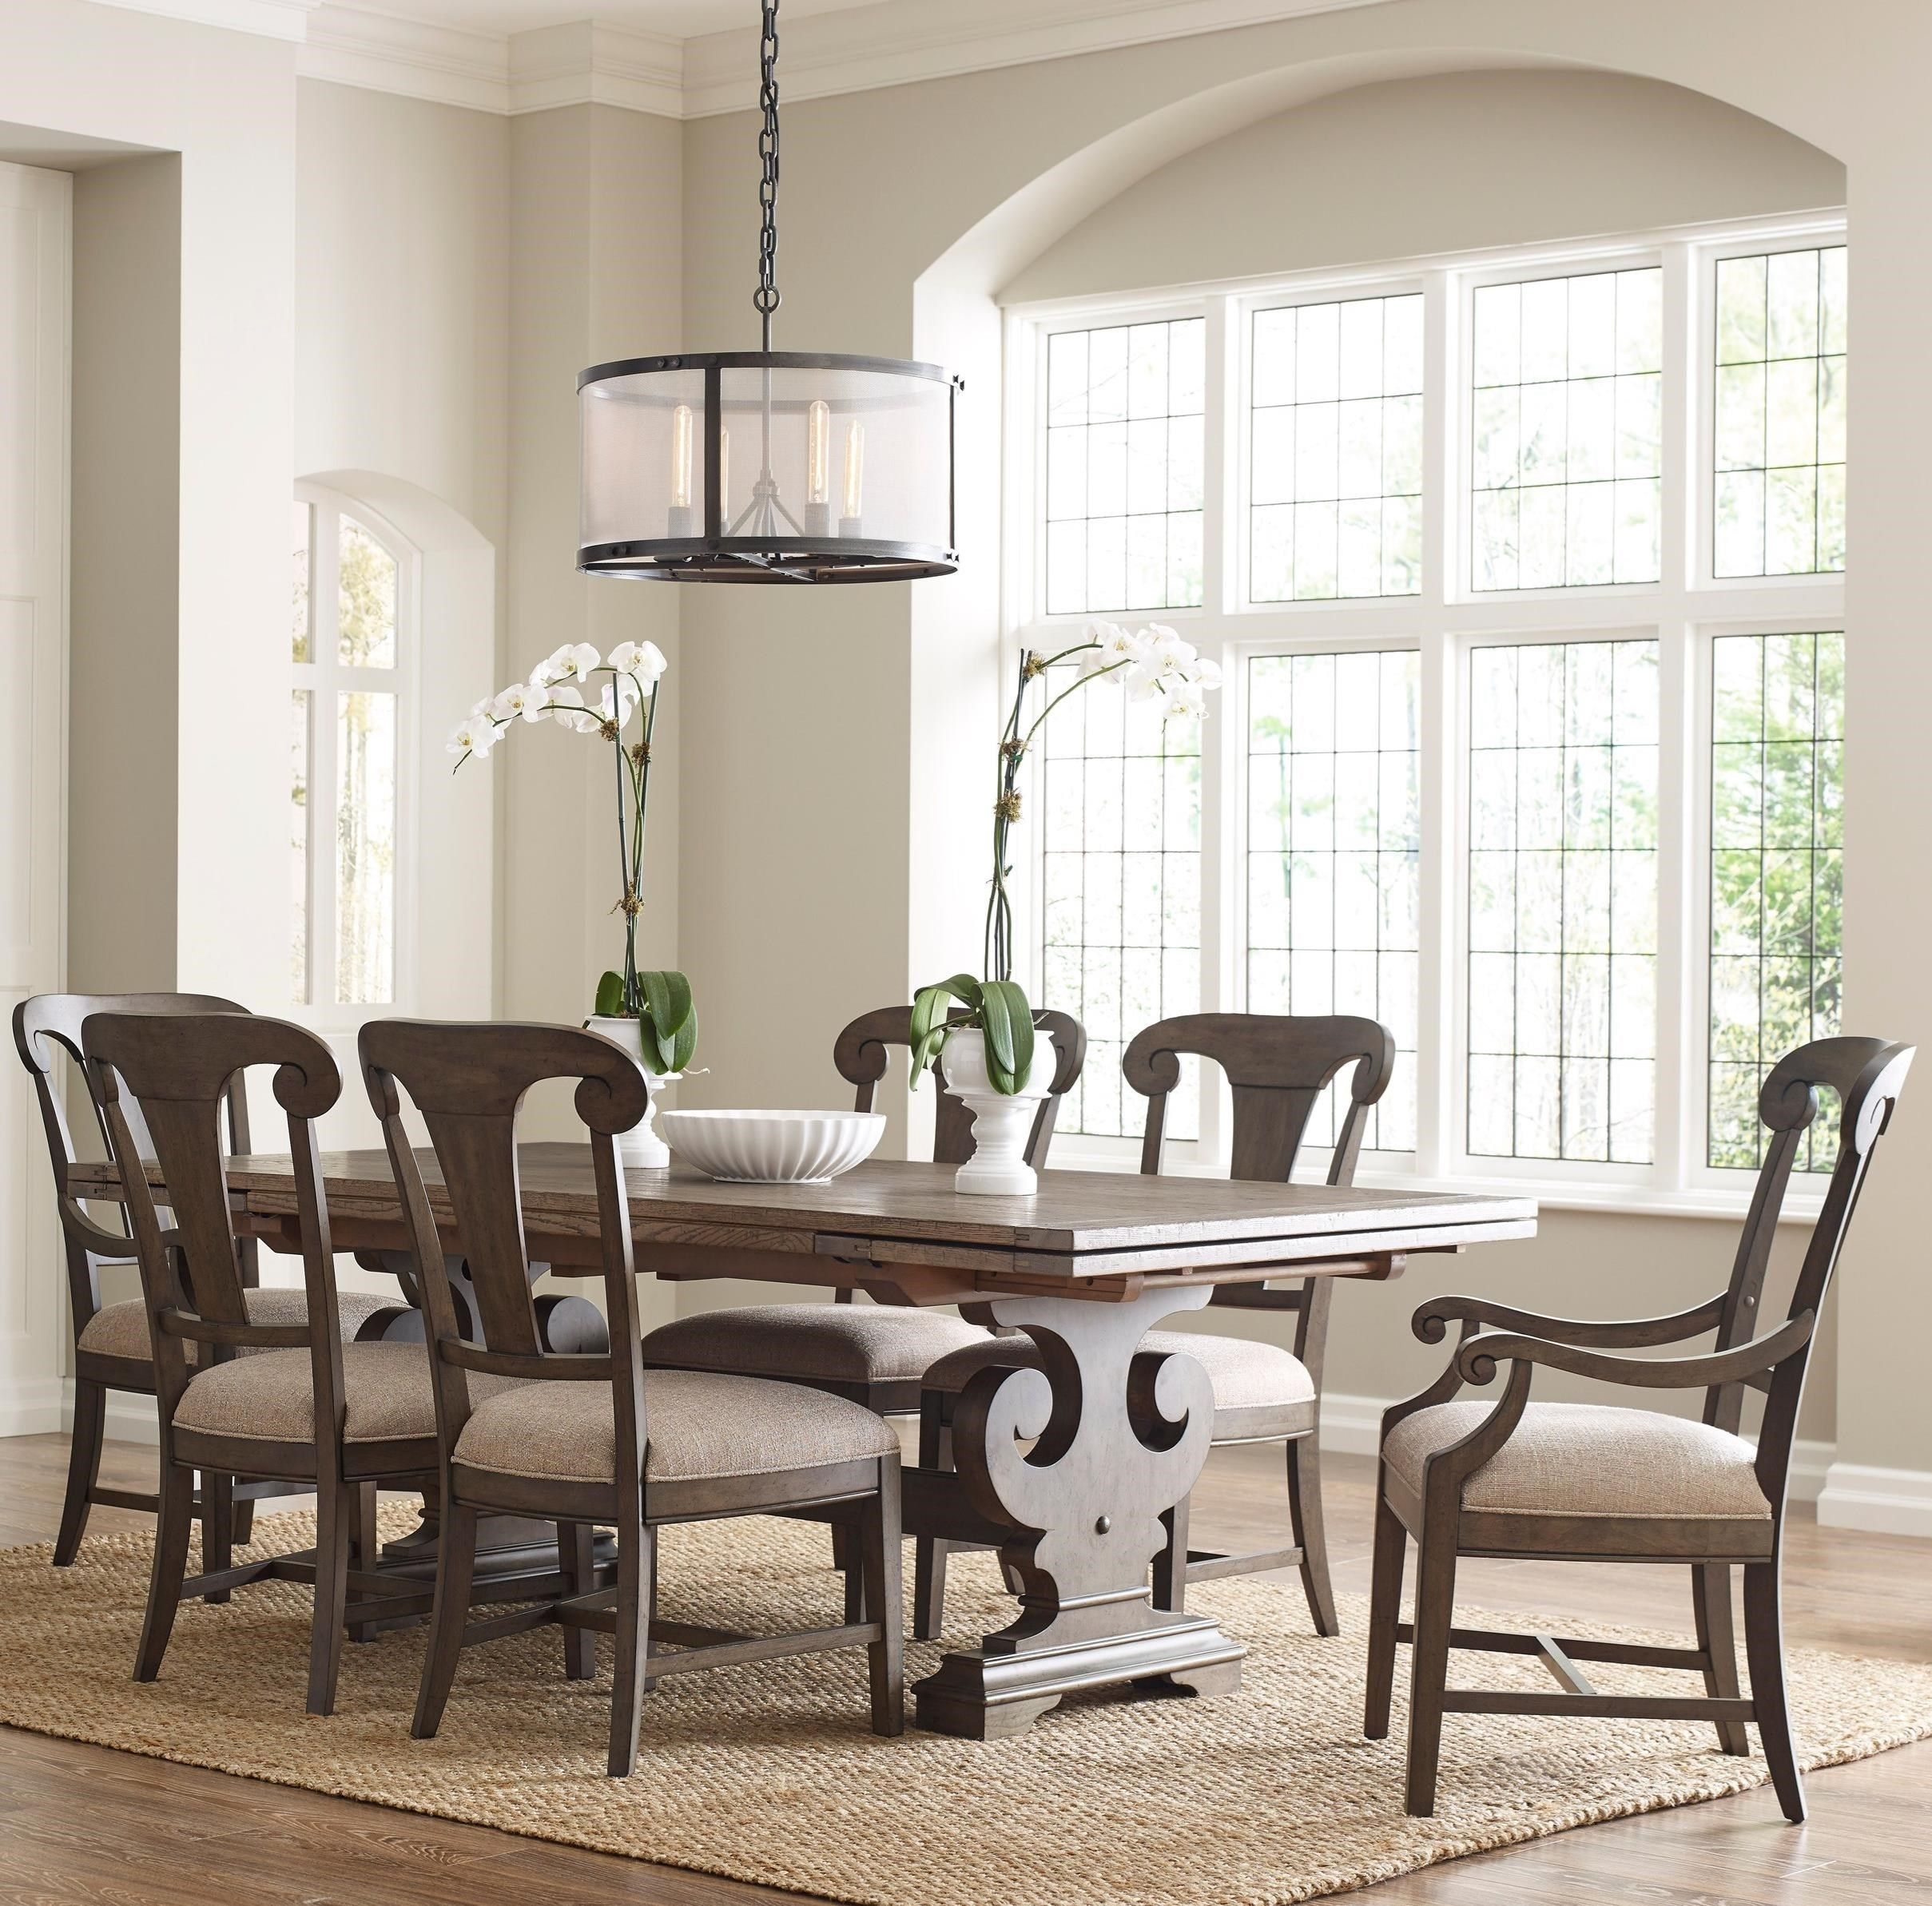 Seven Piece Dining Set With Crawford Refectory Table And Fulton Pertaining To 2017 Crawford 7 Piece Rectangle Dining Sets (View 8 of 20)